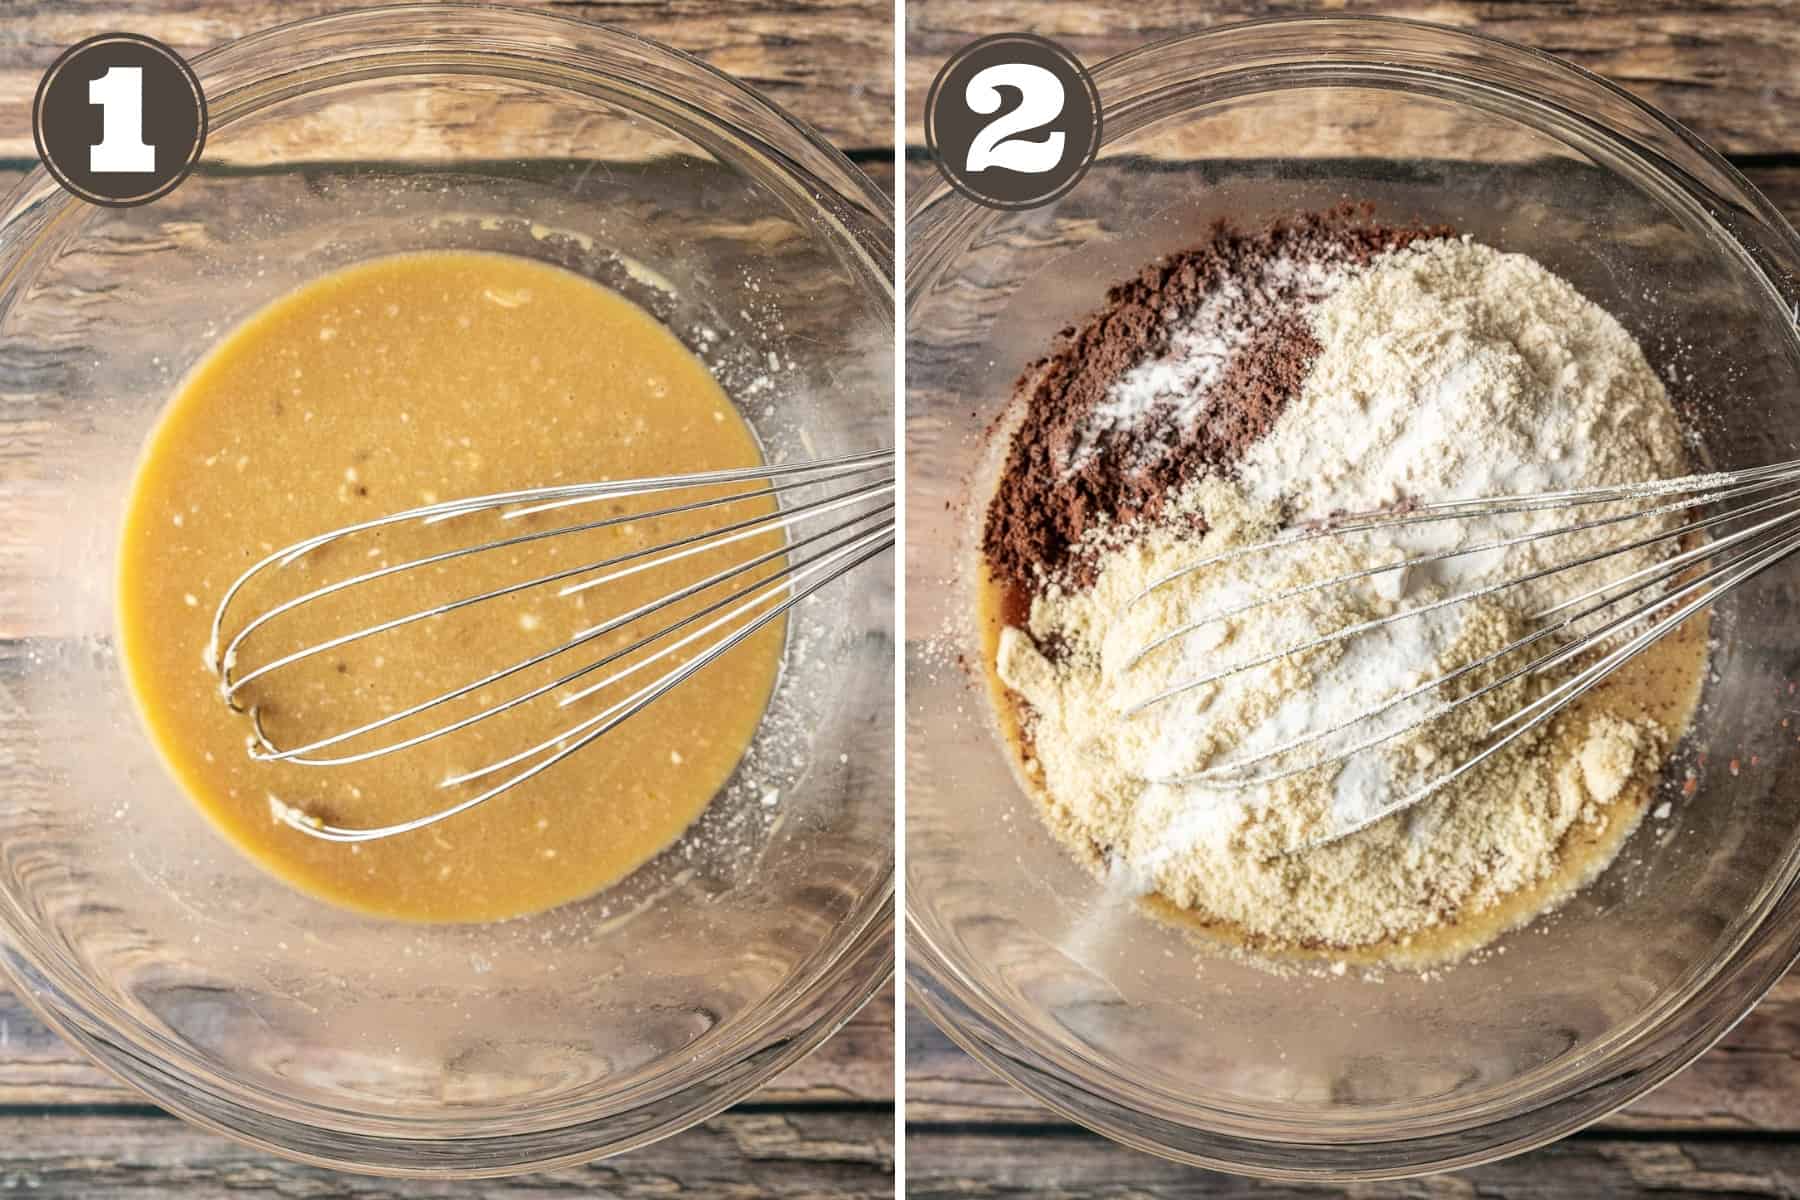 Side by side photos of a bowl containing wet cupcake ingredients and a bowl adding dry ingredients.